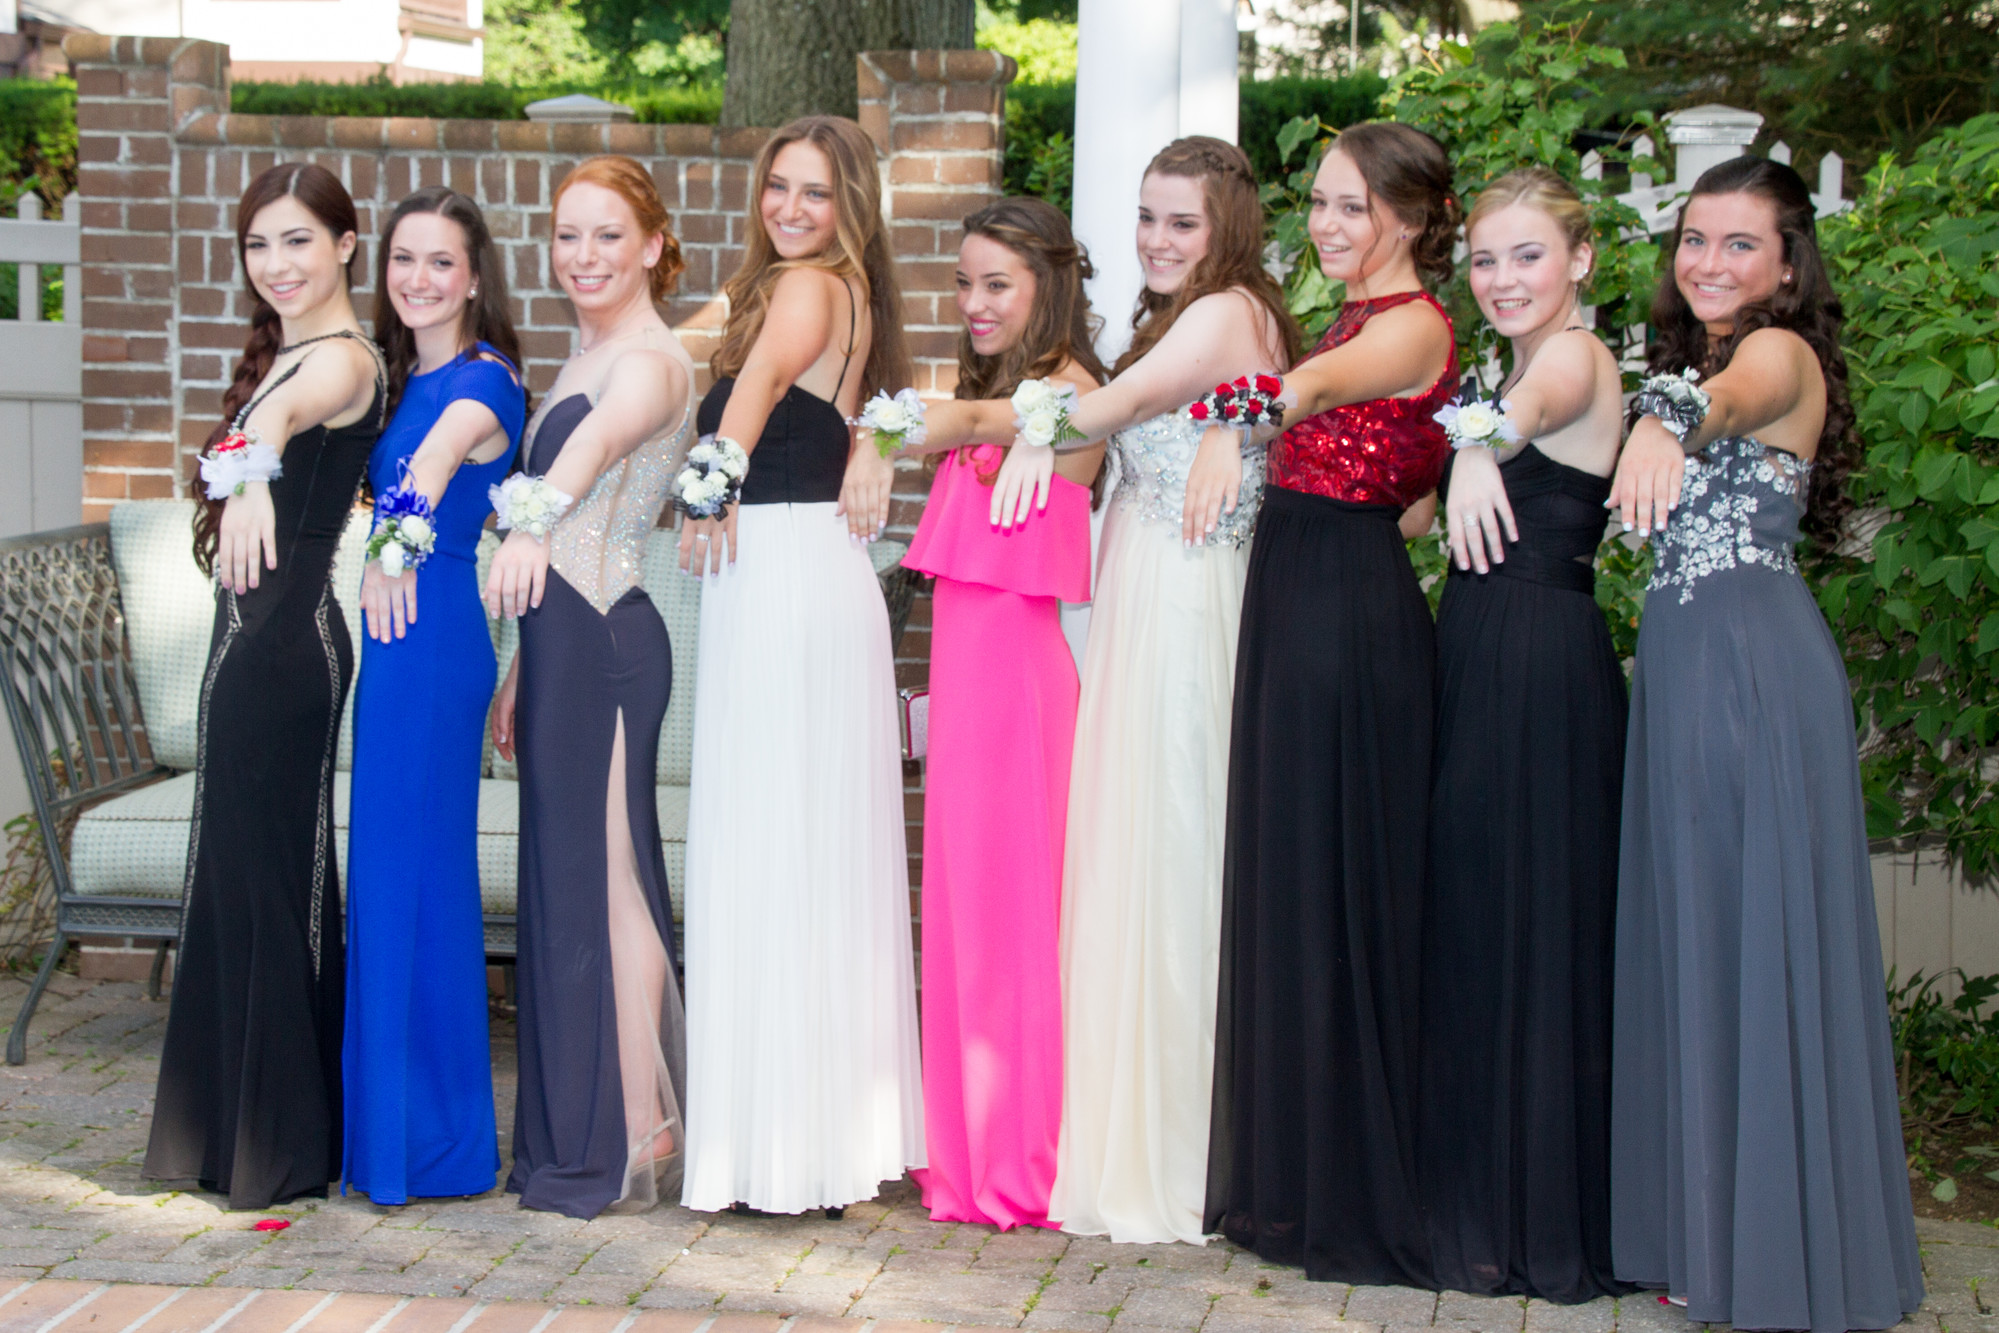 Taylor Bologna, Dana Gelb, Jacquelyn Elfie, Dari Goldman, Juliana Denrich, Emily Brant, Jessica Scandiffio, Jessica Olson and Casey Backus showed off their corsages at a pre-prom party.